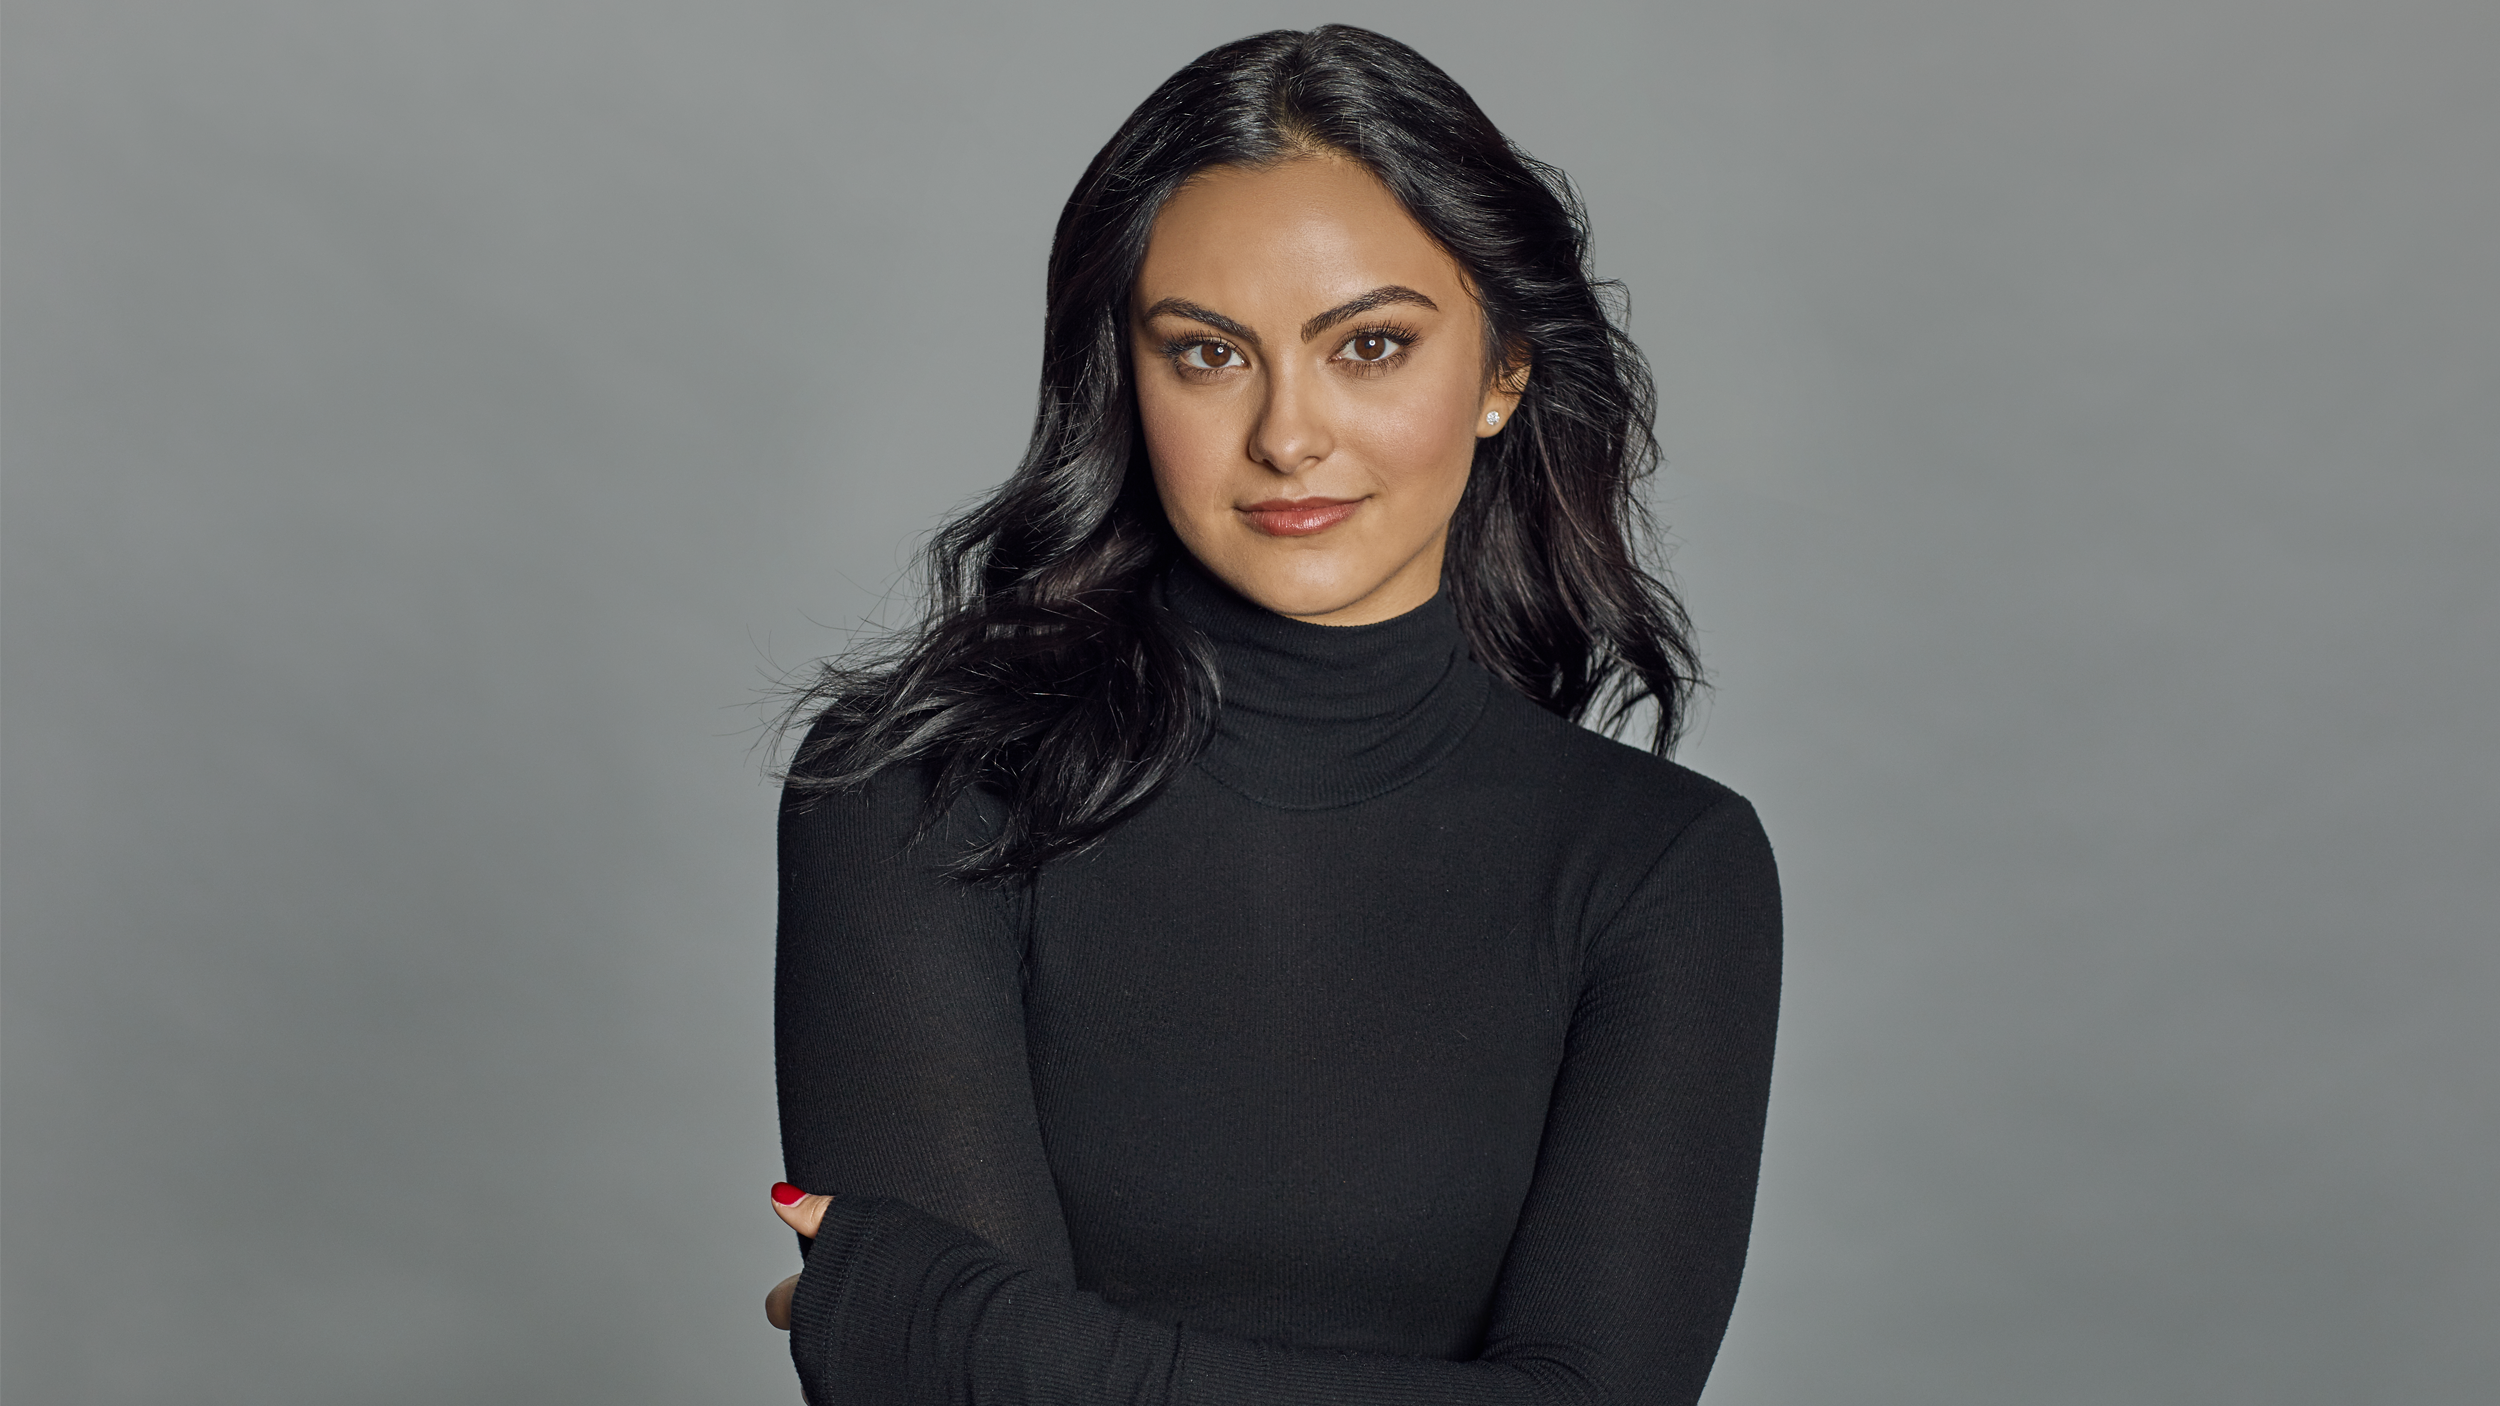 Camila Mendes 2019 Photoshoot Wallpapers